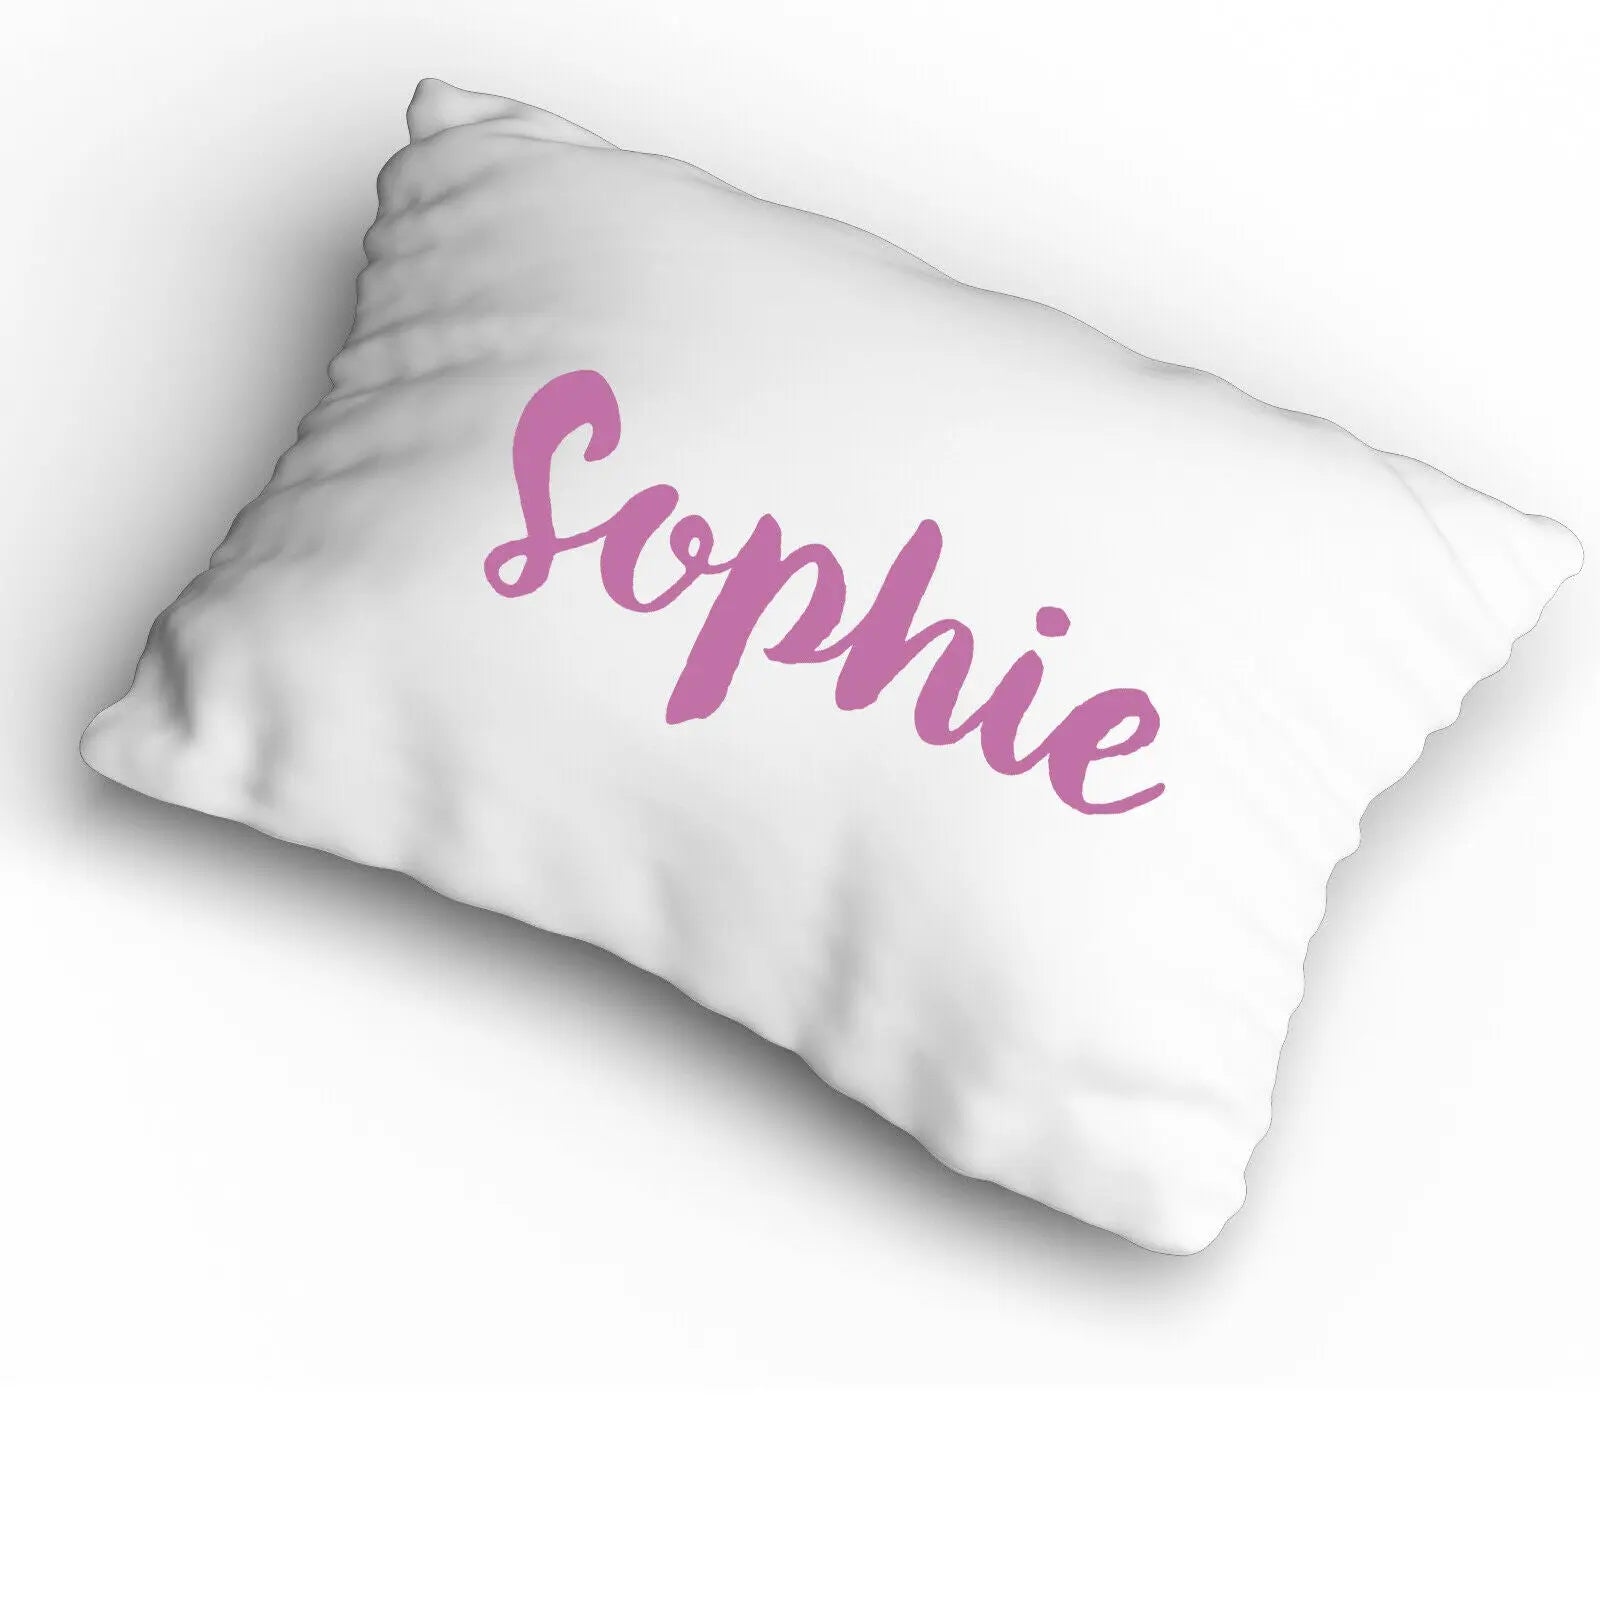 Personalised Name Cover Pillowcase Custom Gift Initials Pillow Case - Pink Cursive